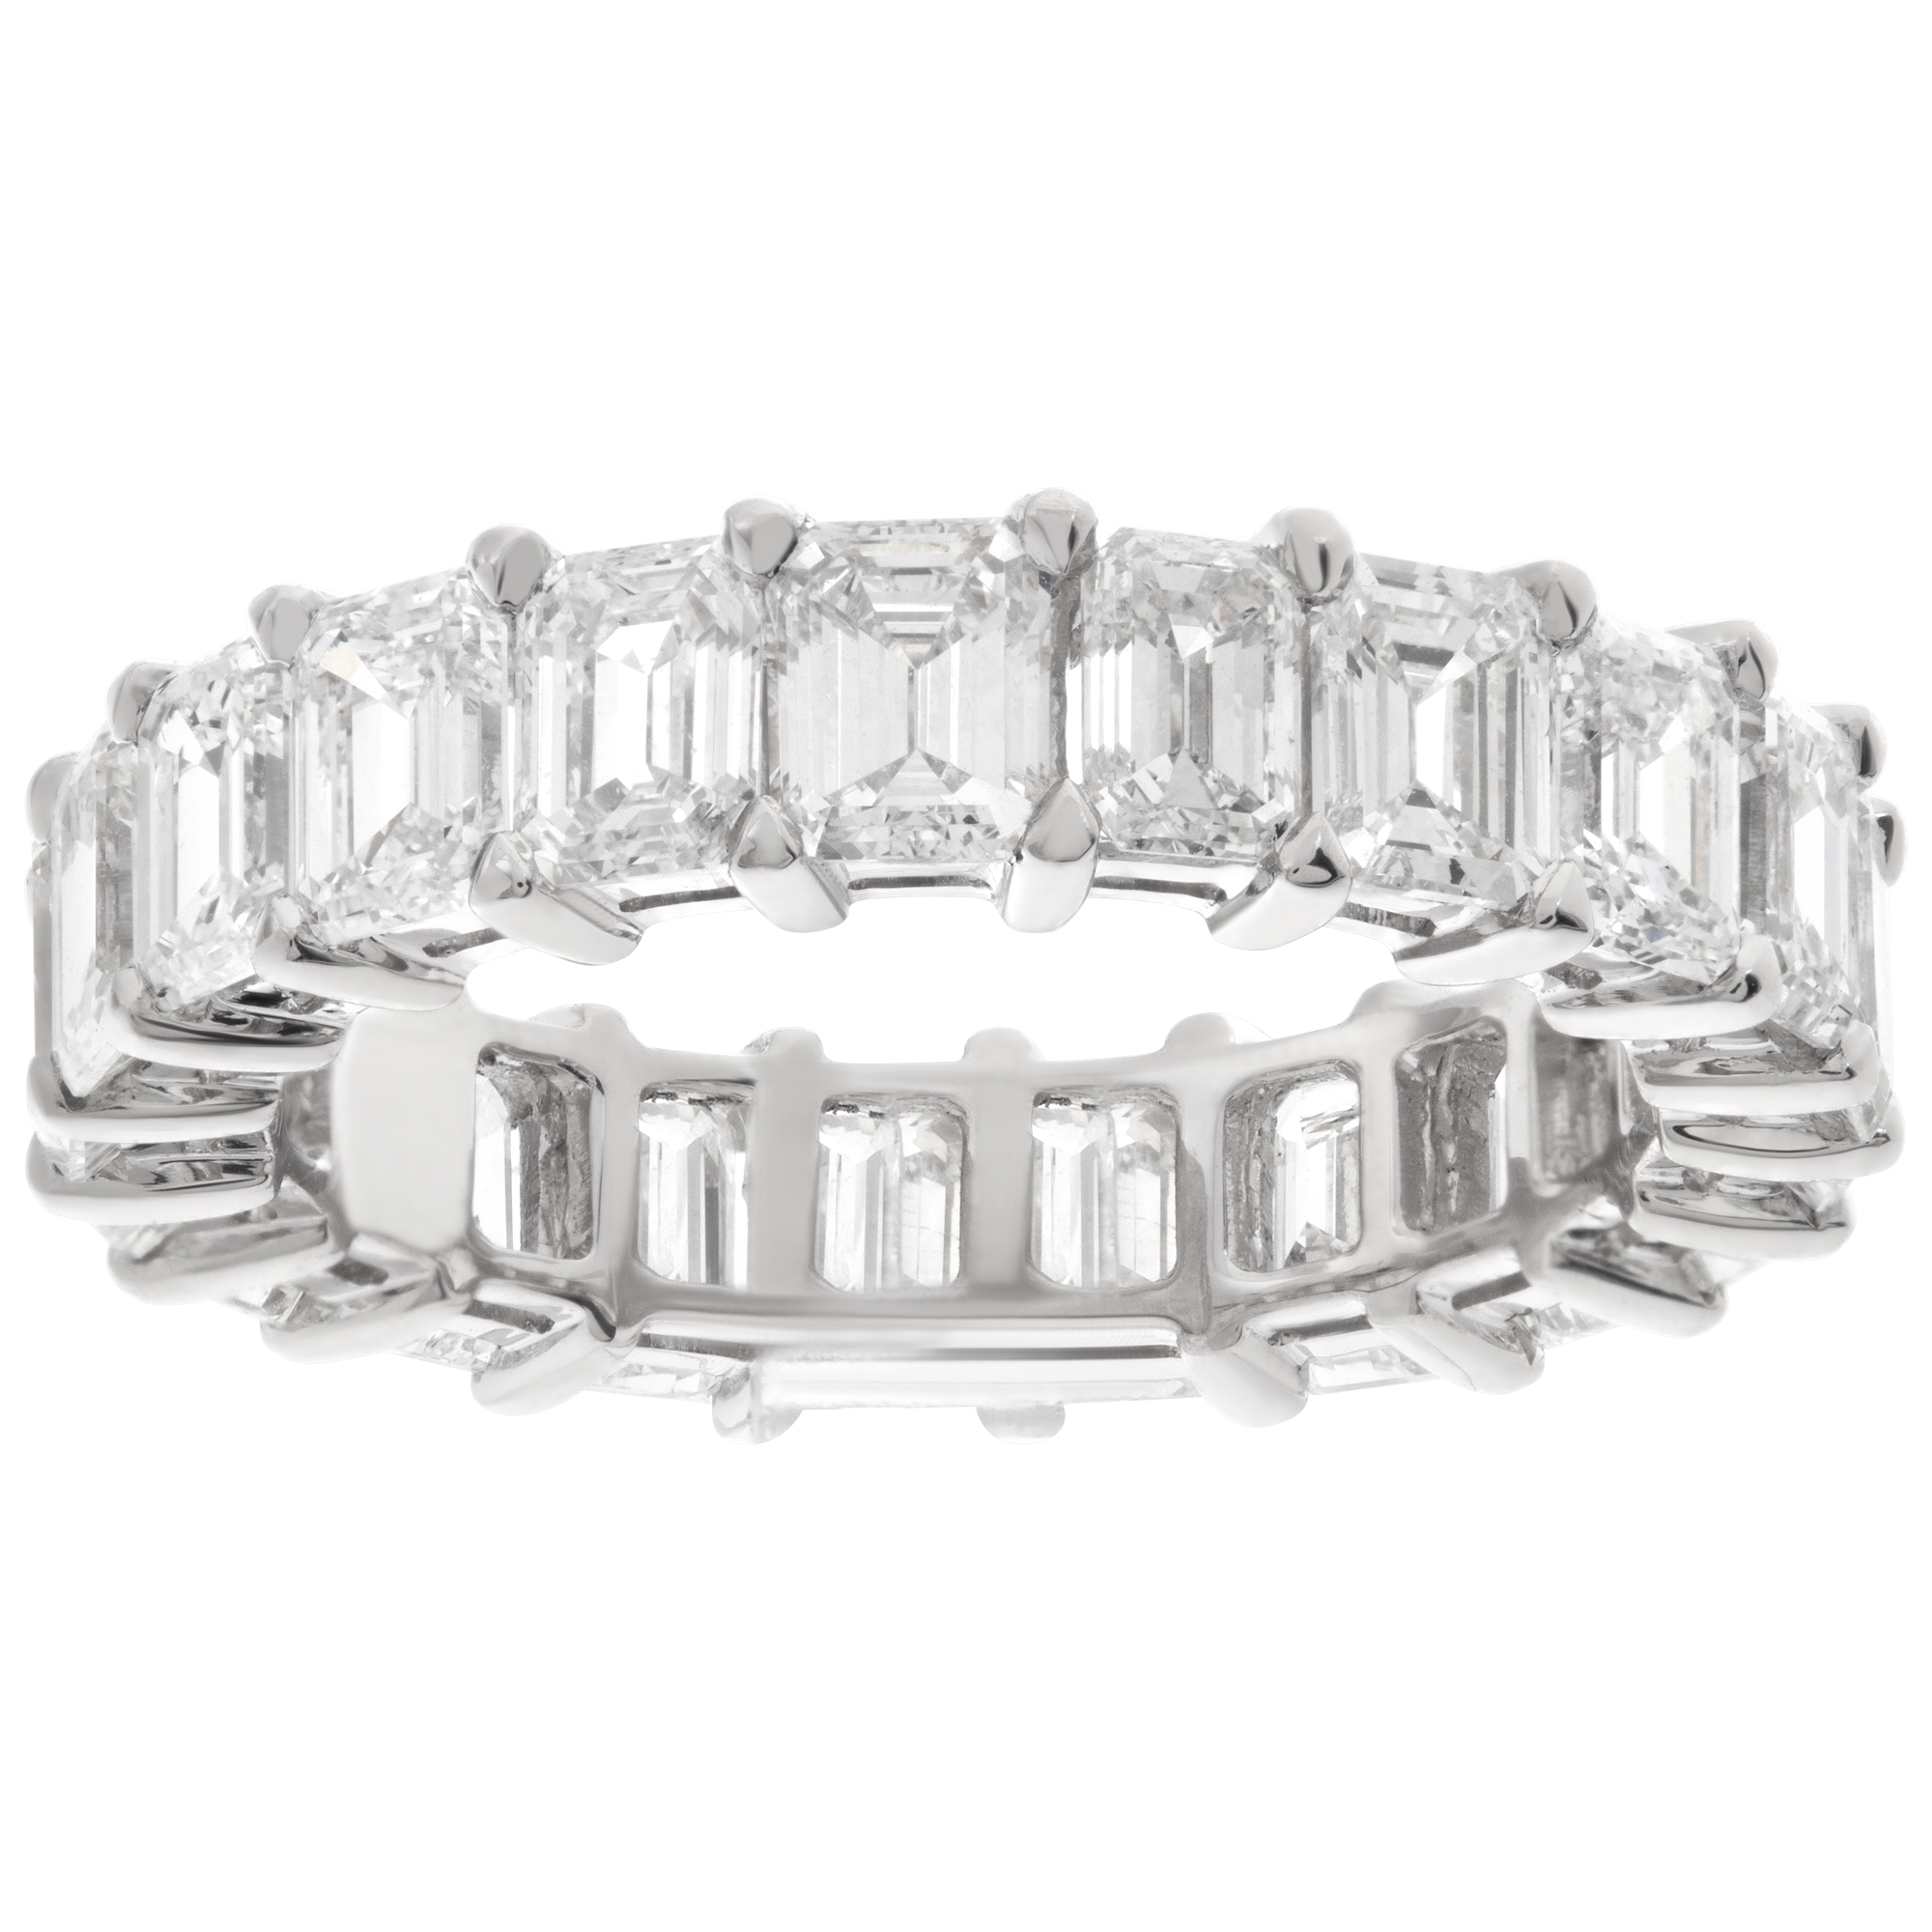 Diamond eternity band with 5.12 cts set in platinum